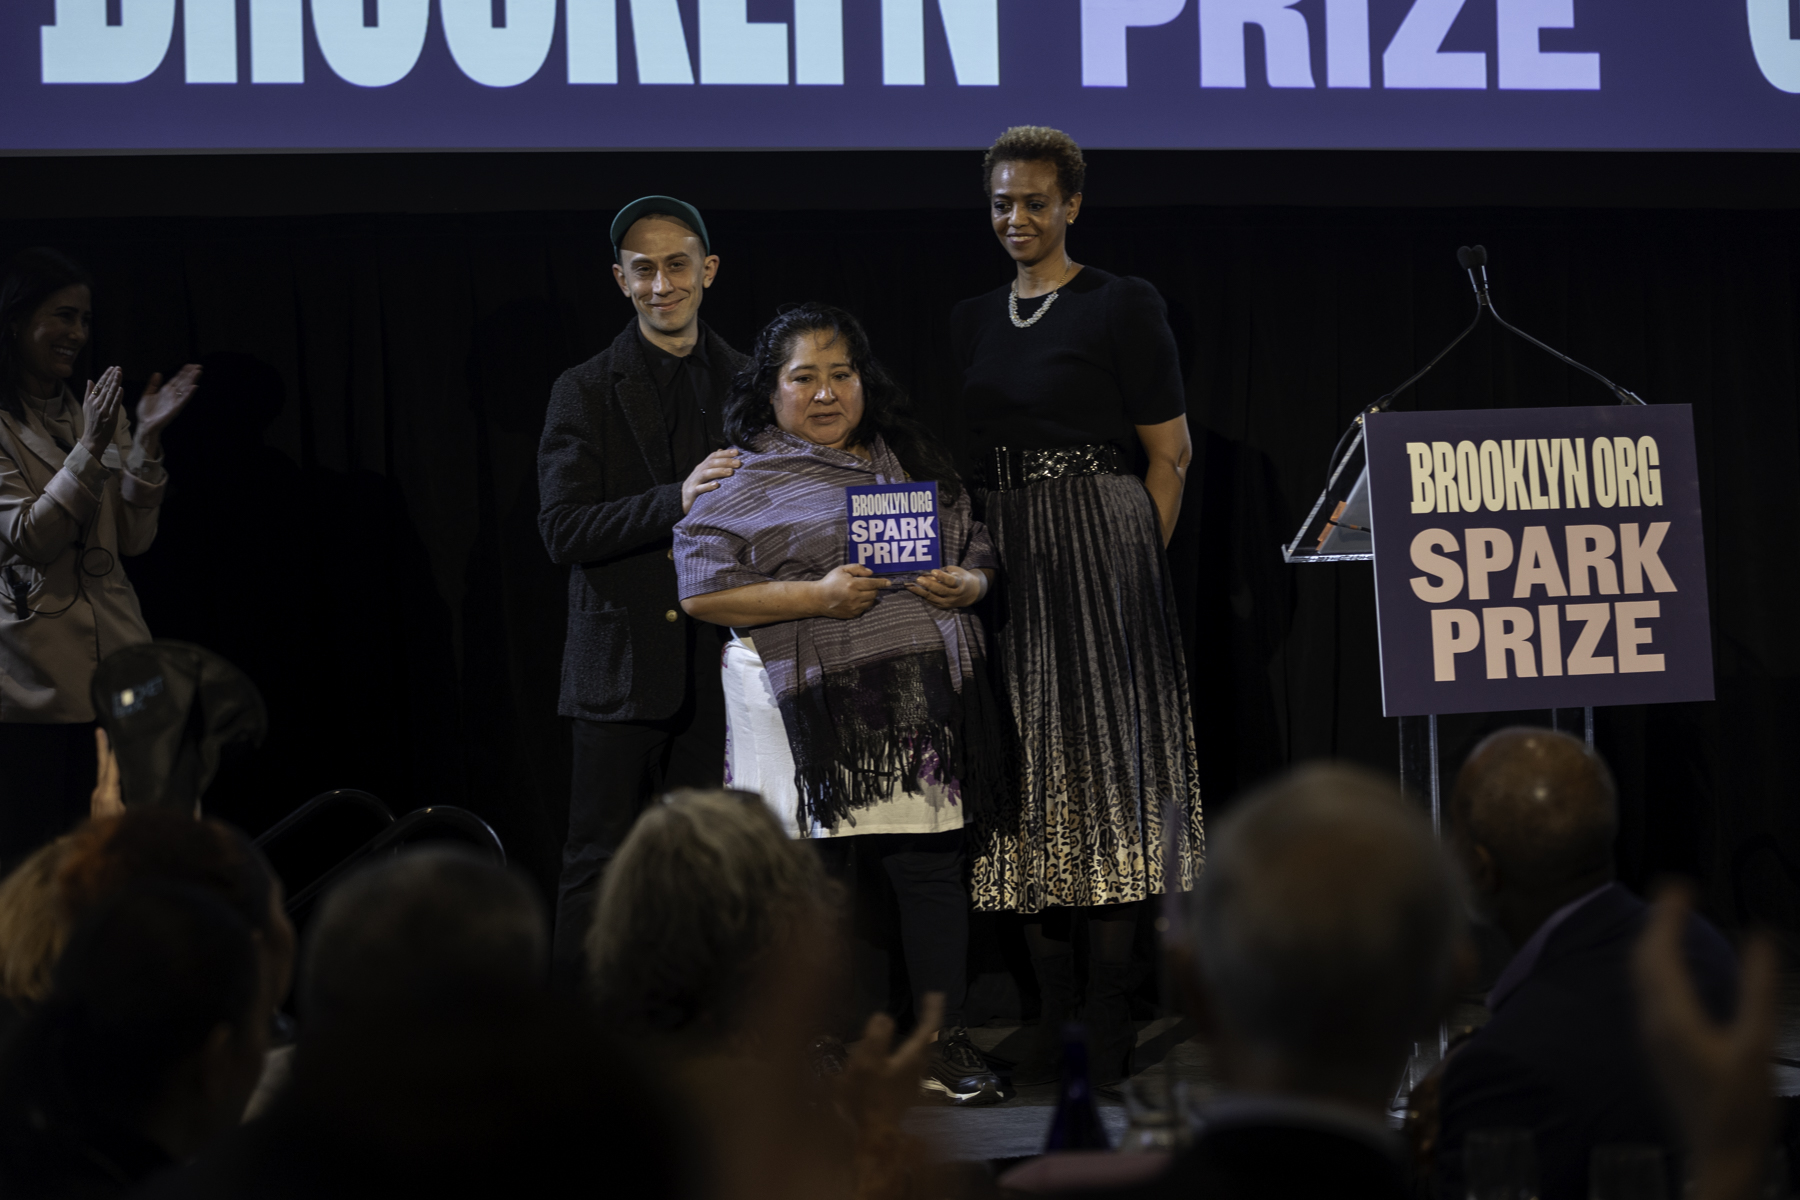 Recipient holding an award at a podium during a brooklyn community foundation event with two presenters standing by.